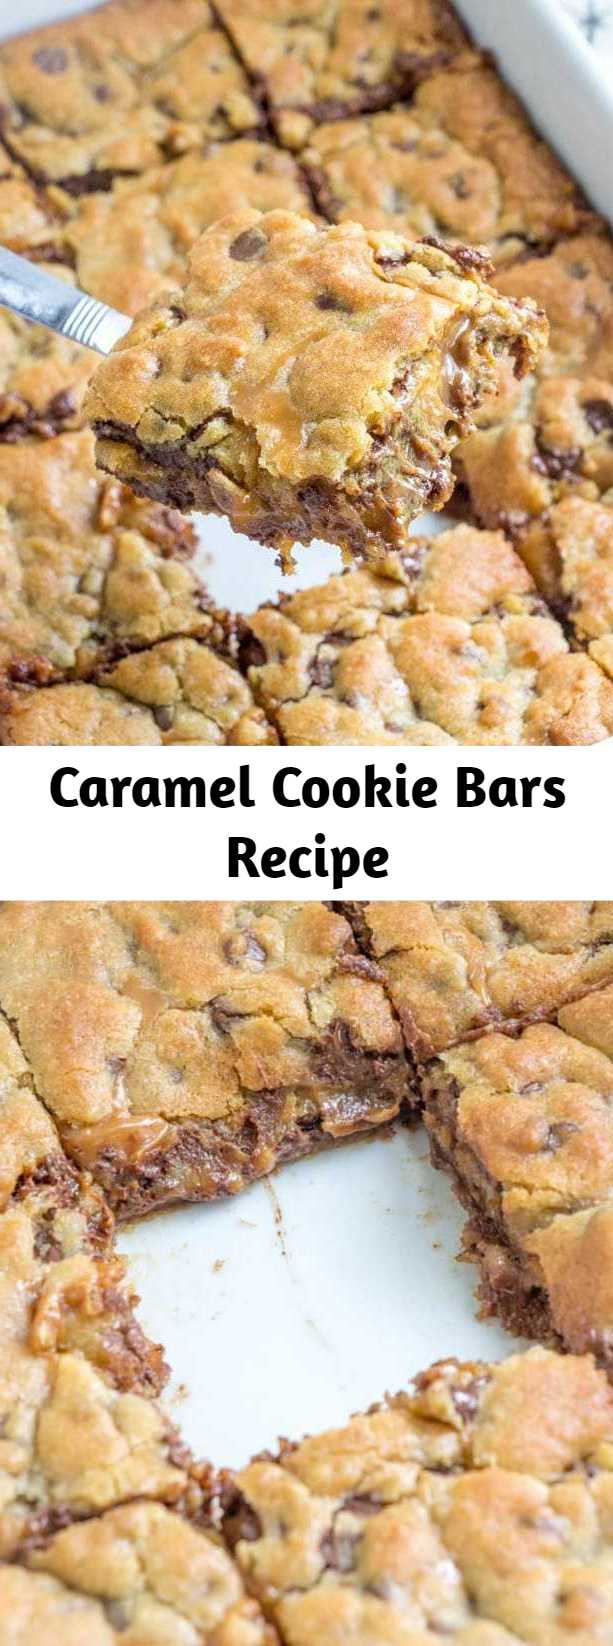 Caramel Cookie Bars Recipe - Delicious Caramel Cookie Bars with an amazing layer of gooey caramel stuffed in better the layers with a hint of peanut butter. These cookie bars are EPIC and you'll never make them anyway again!